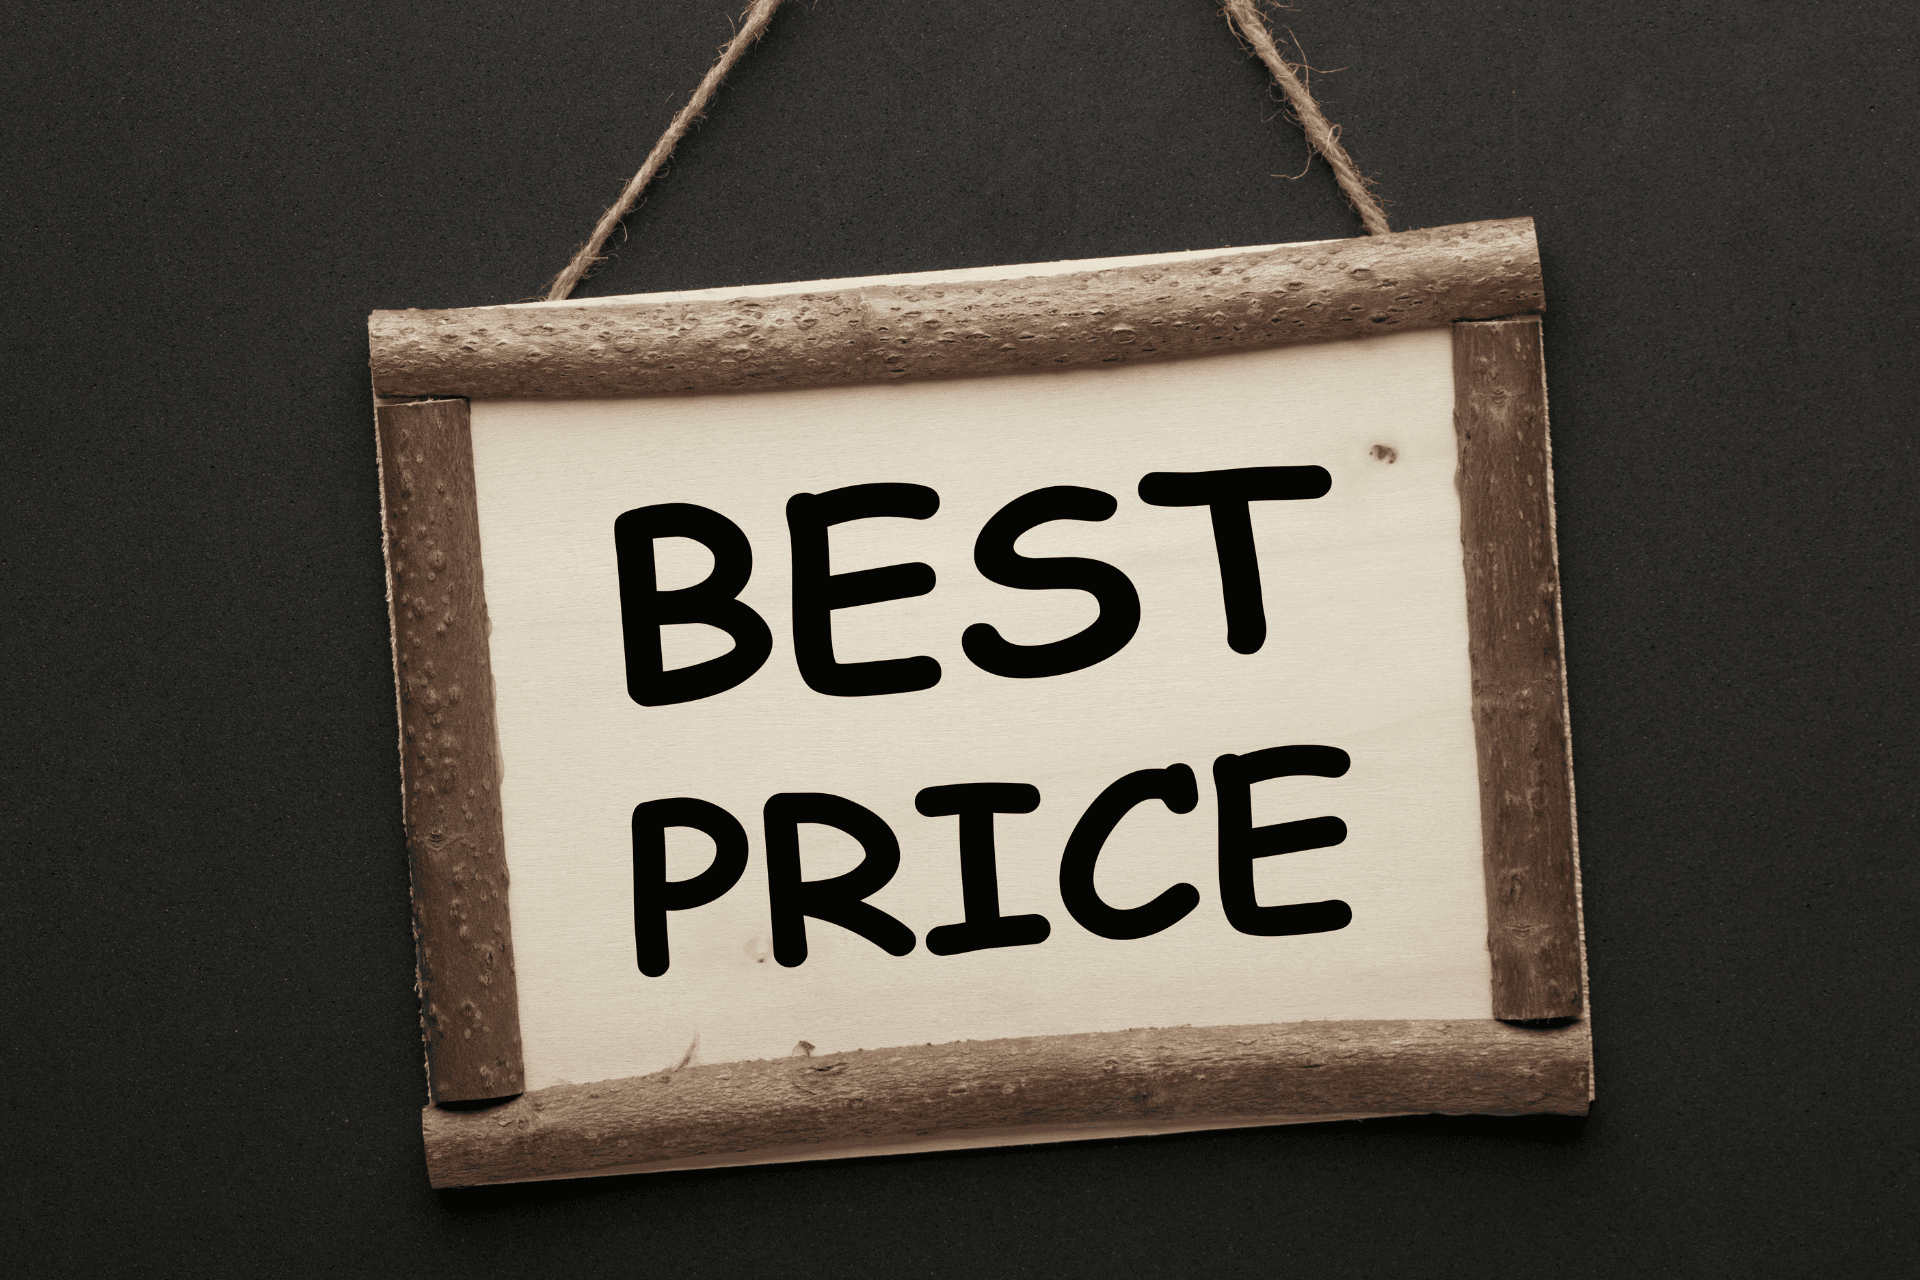 Setting right sales price for business